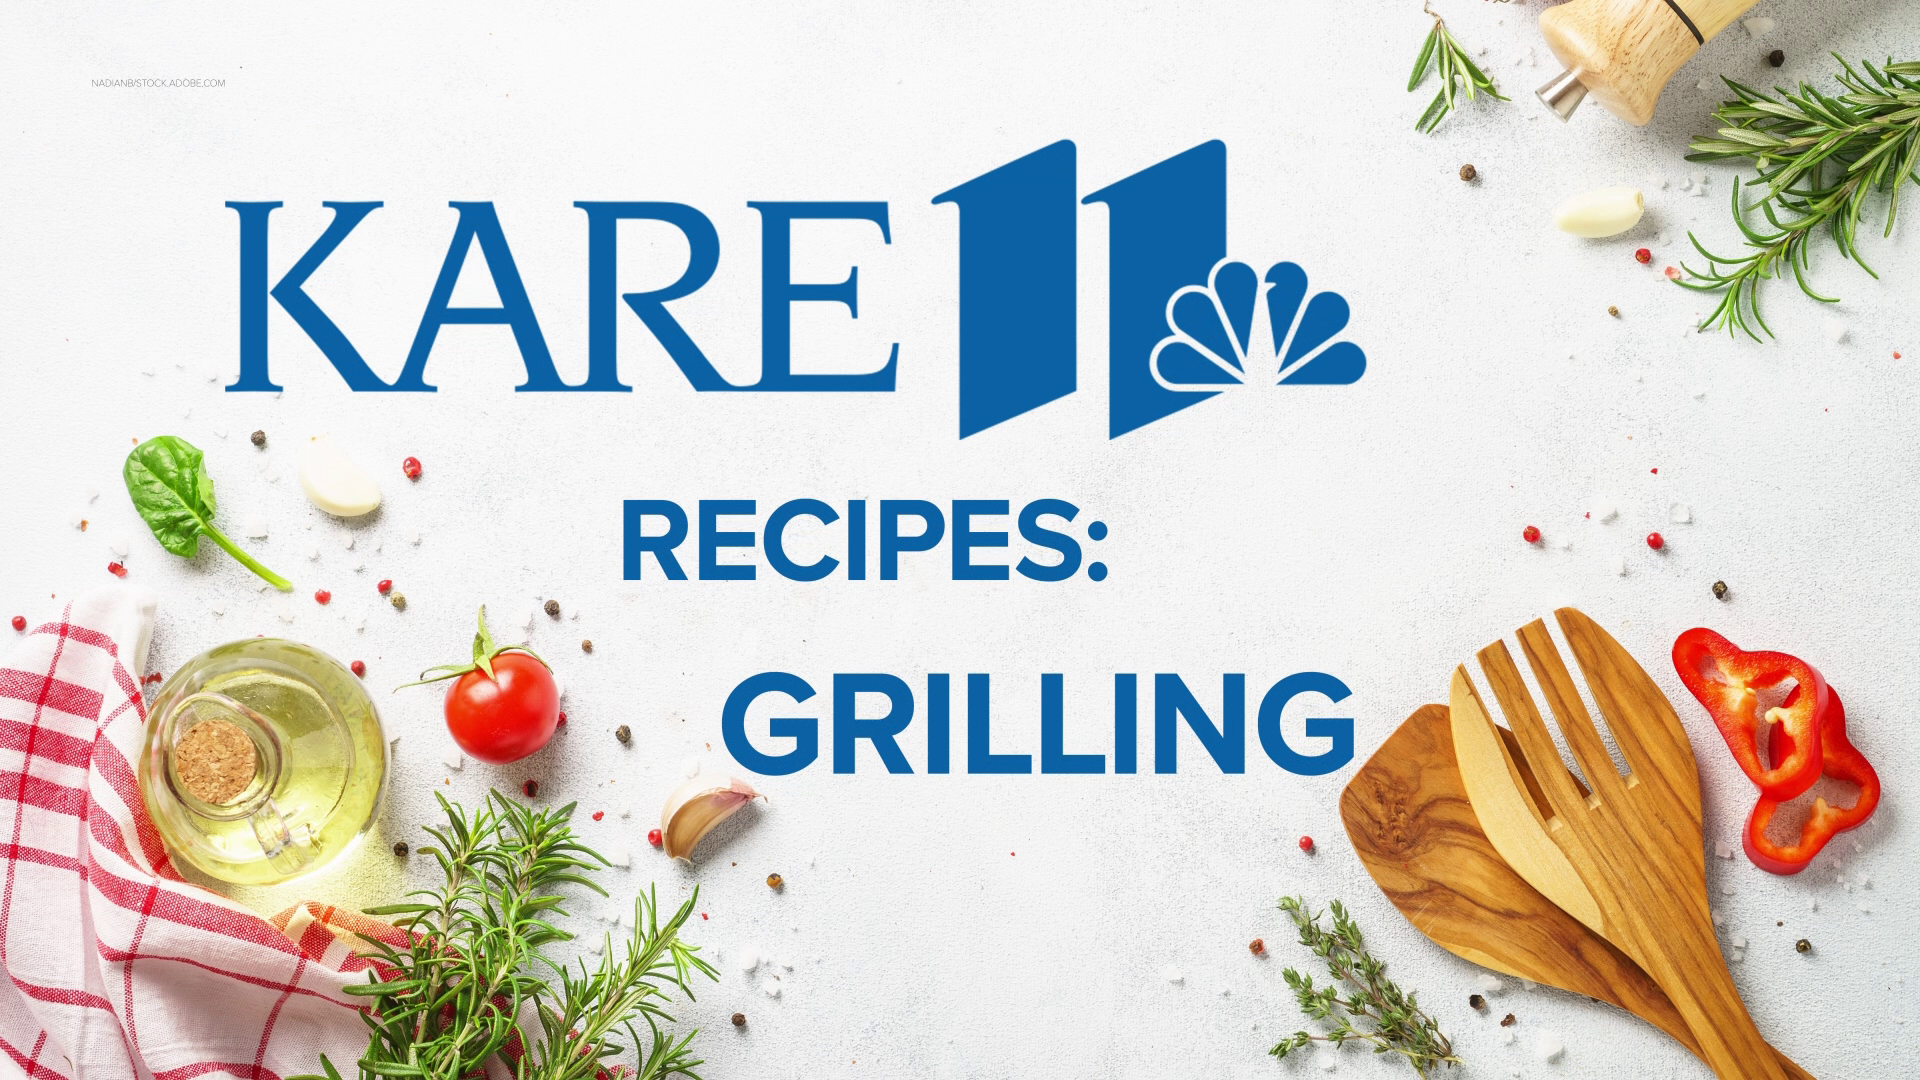 Fire up the grill as KARE 11 shares some delicious recipes to try this summer.